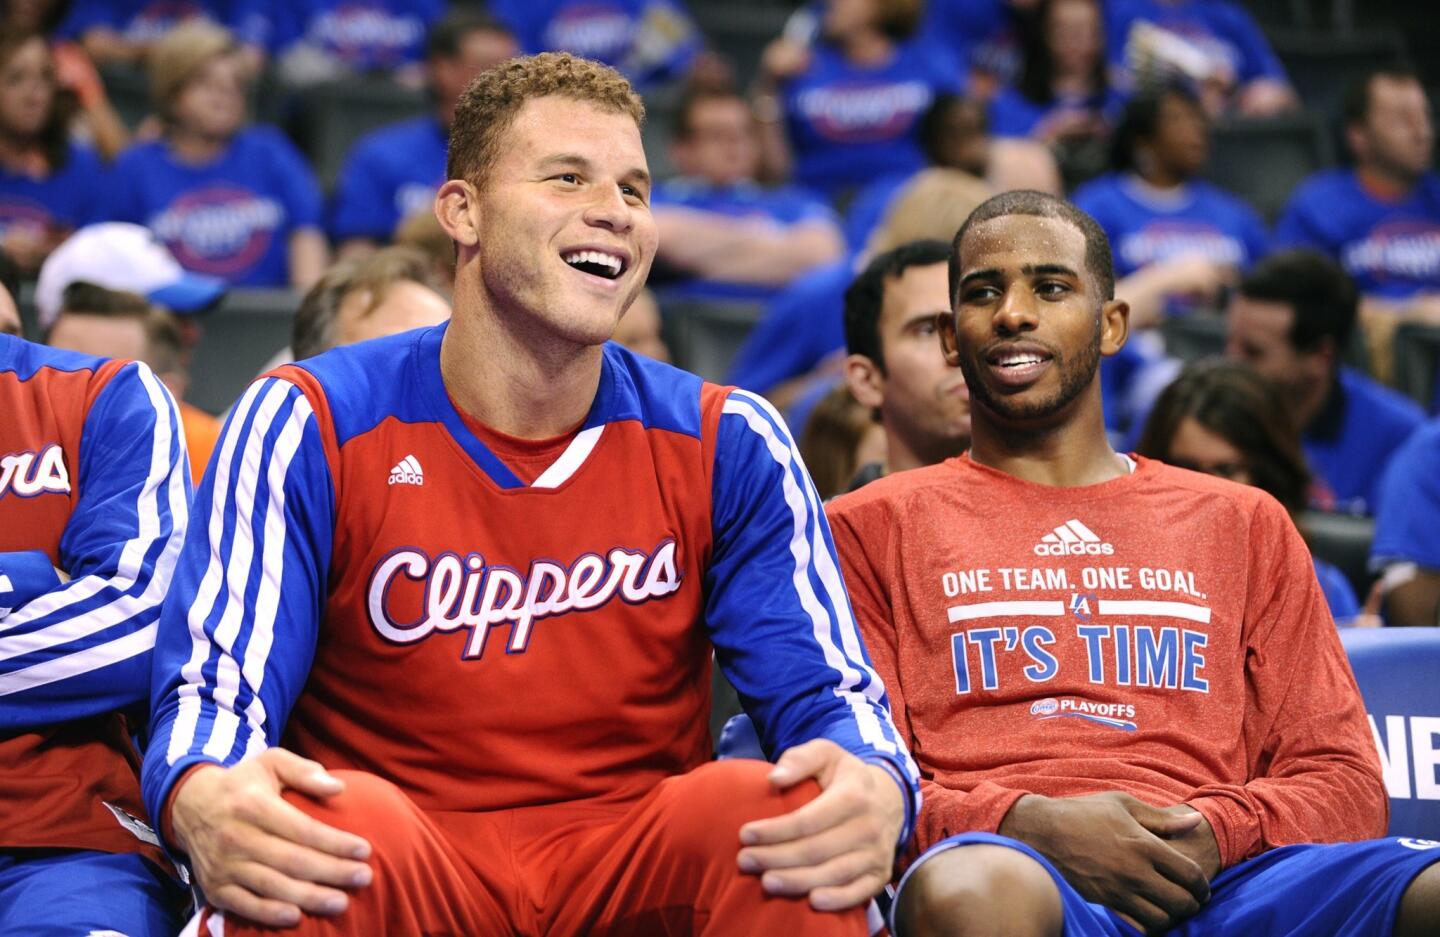 All-Star power forward Blake Griffin and point guard Chris Paul could sit back and watch the fourth quarter from the bench in a 122-105 victory over the Thunder on Monday night in Oklahoma City.